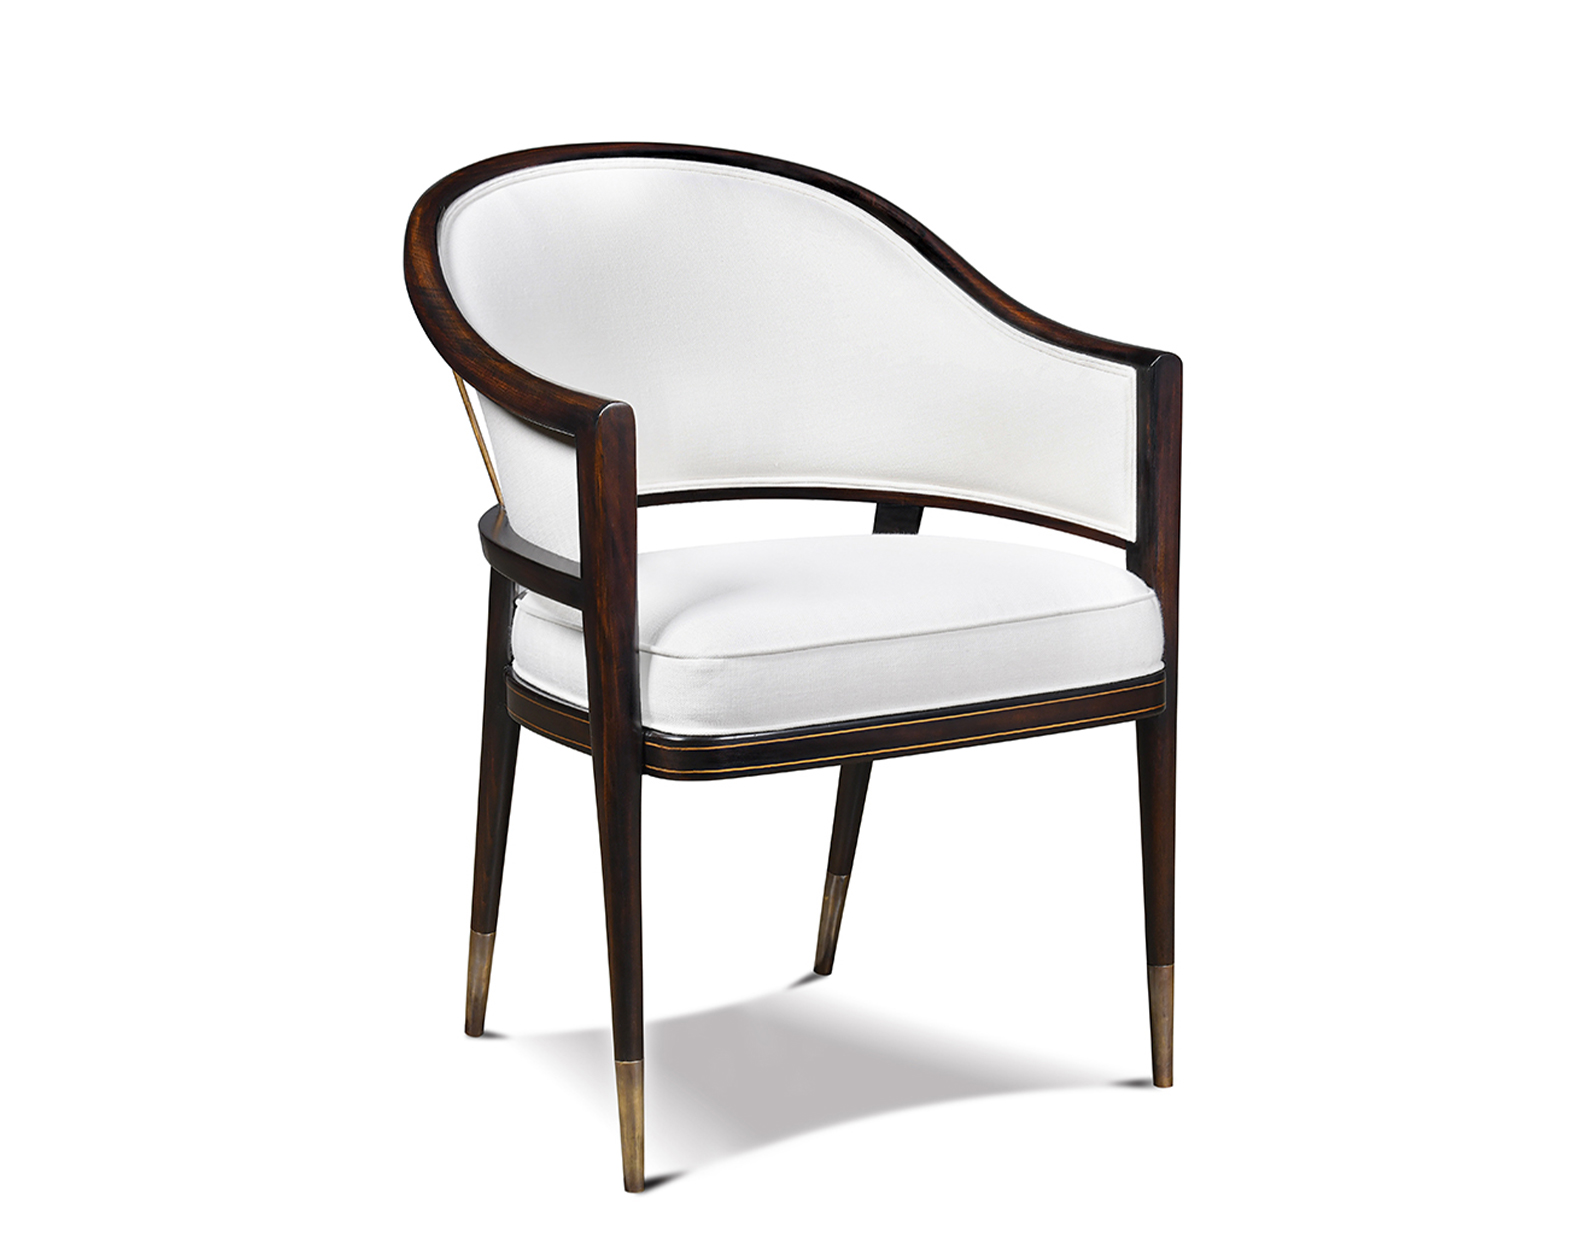 GRASSE UPHOLSTERED CHAIR